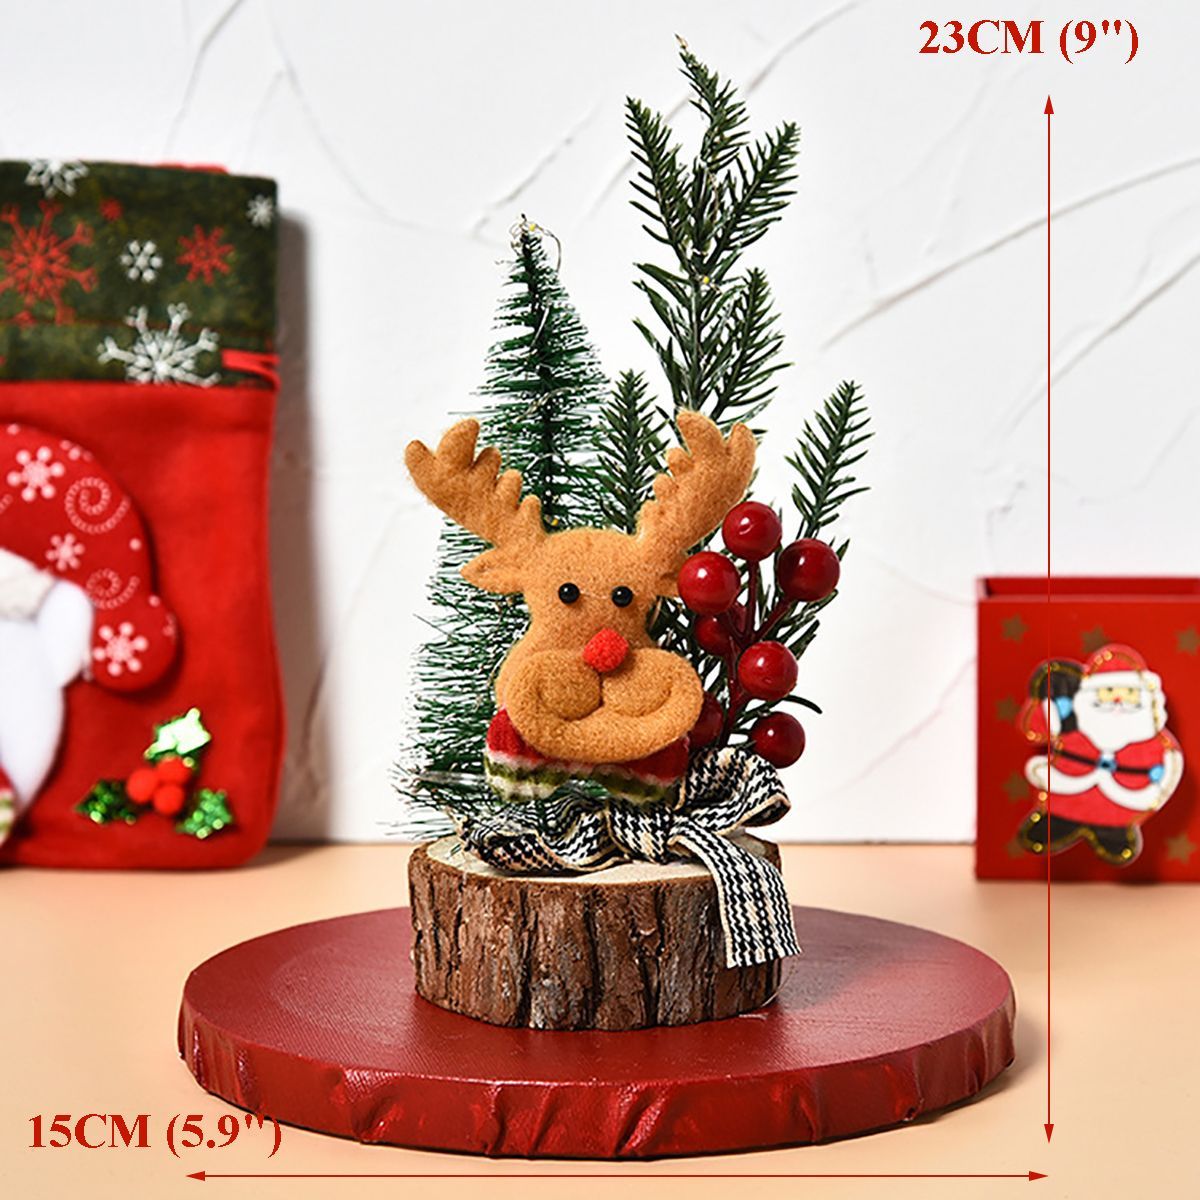 Mini-Wooden-Led-Christmas-Tree-Desk-Table-Decoration-Gift-Cute-Xmas-Home-Decoration-1738806